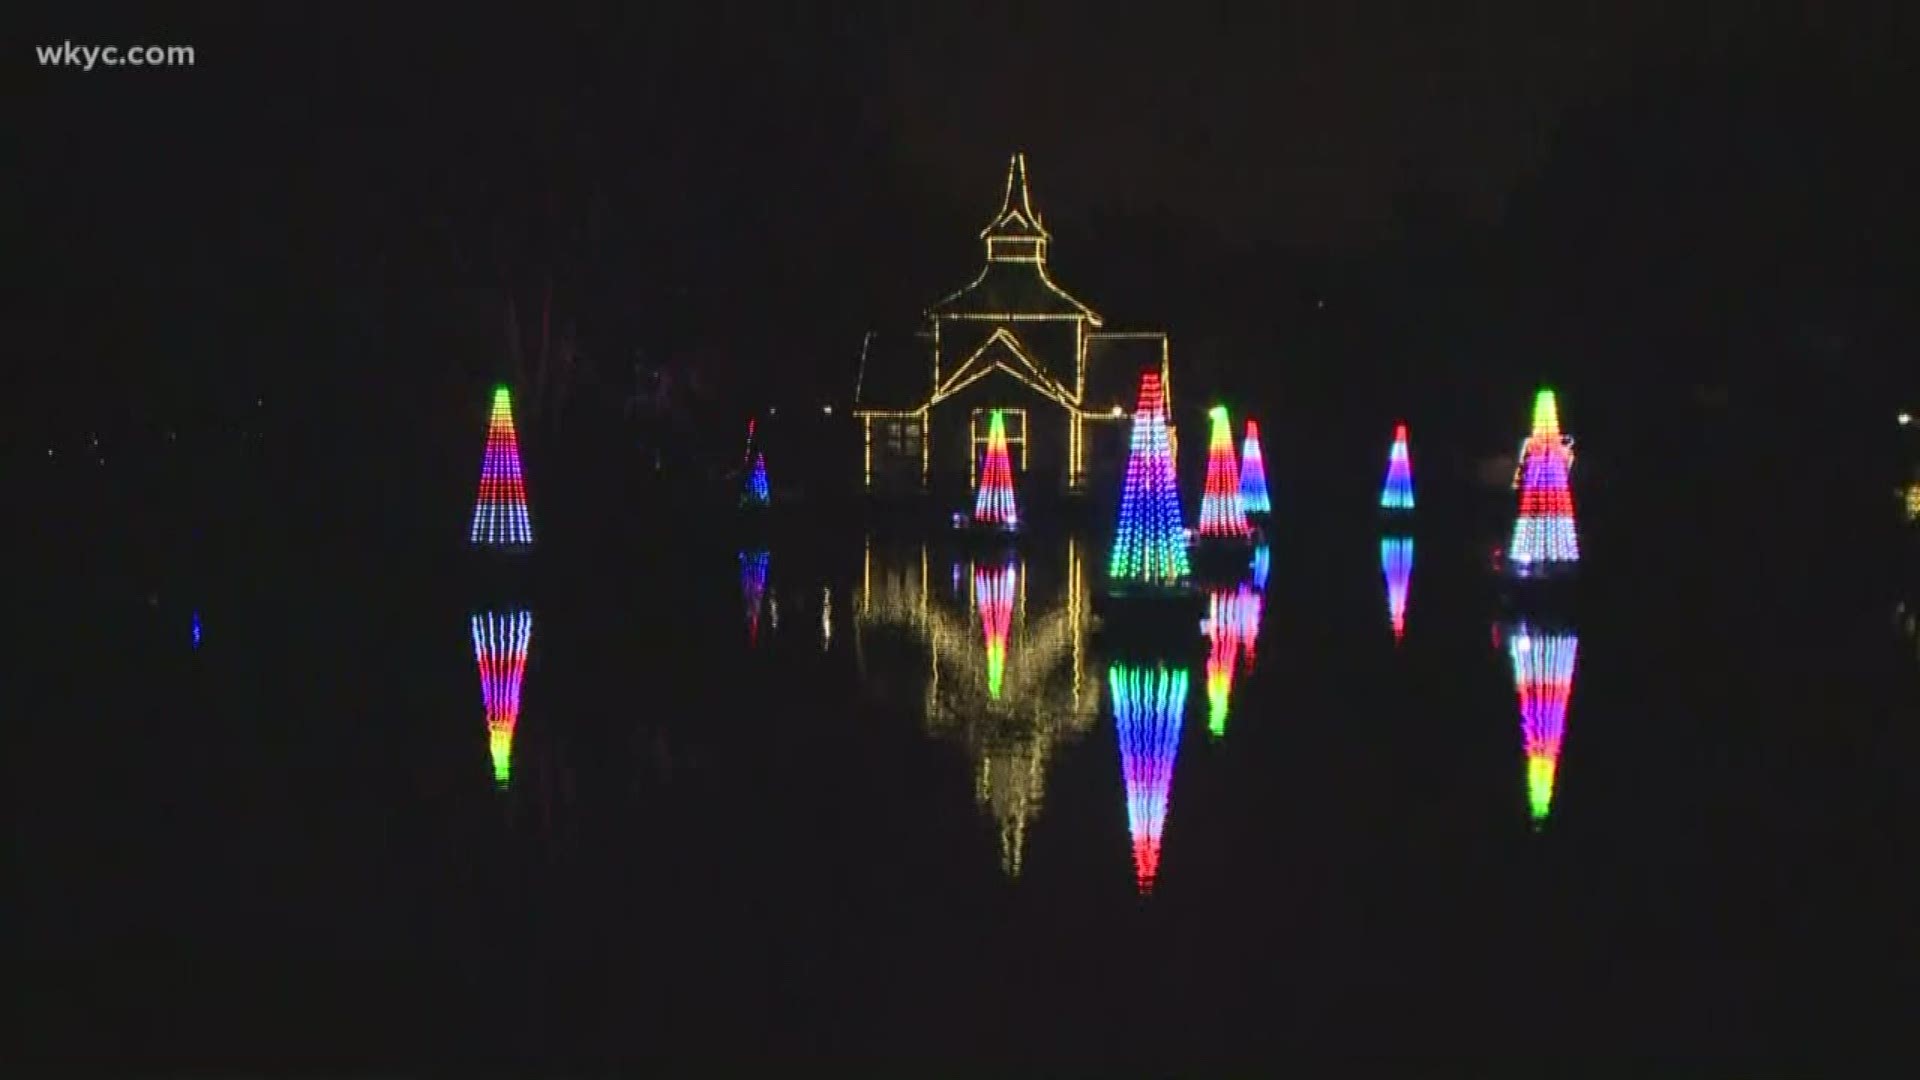 The holiday season has arrived, and the Cleveland Zoo is celebrating with its 'Wild Winter Lights' event. Austin Love was there to get a sneak peek.